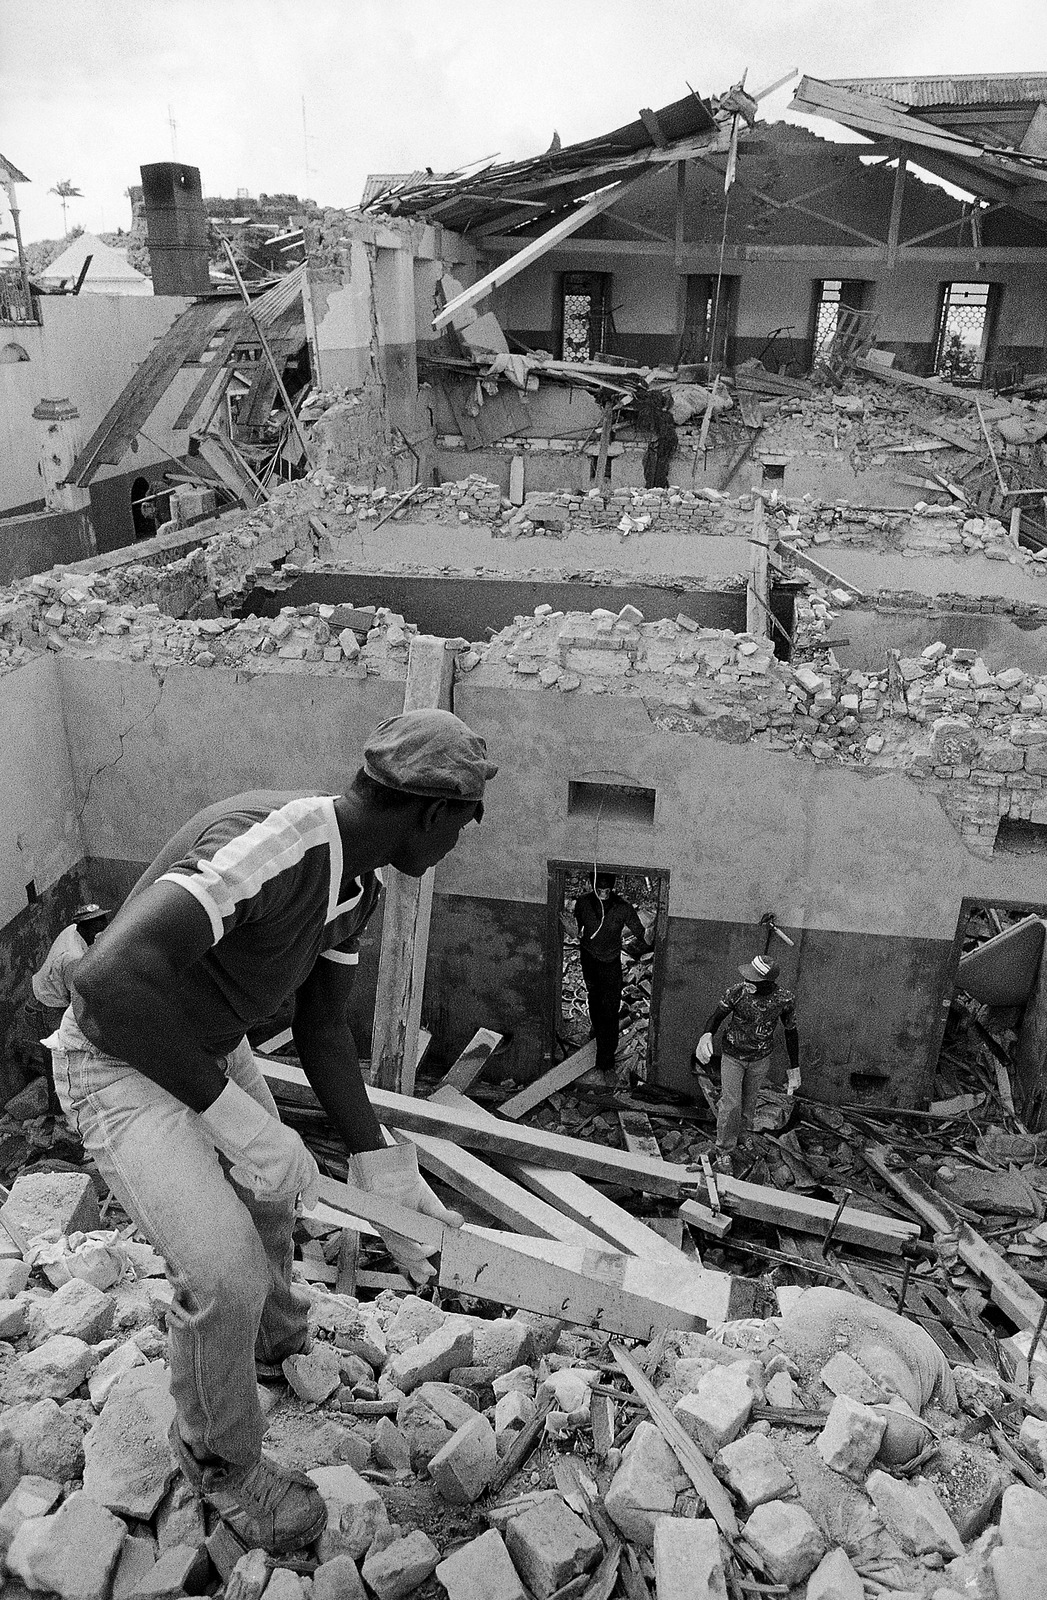 Workers sift through the bombed remains of the Richmond Hill Mental Hospital in St. George’s, Grenada on Friday, Nov. 4, 1983. The institution was bombed by U.S. forces during their invasion of Grenada. (AP/Pete Leabo)